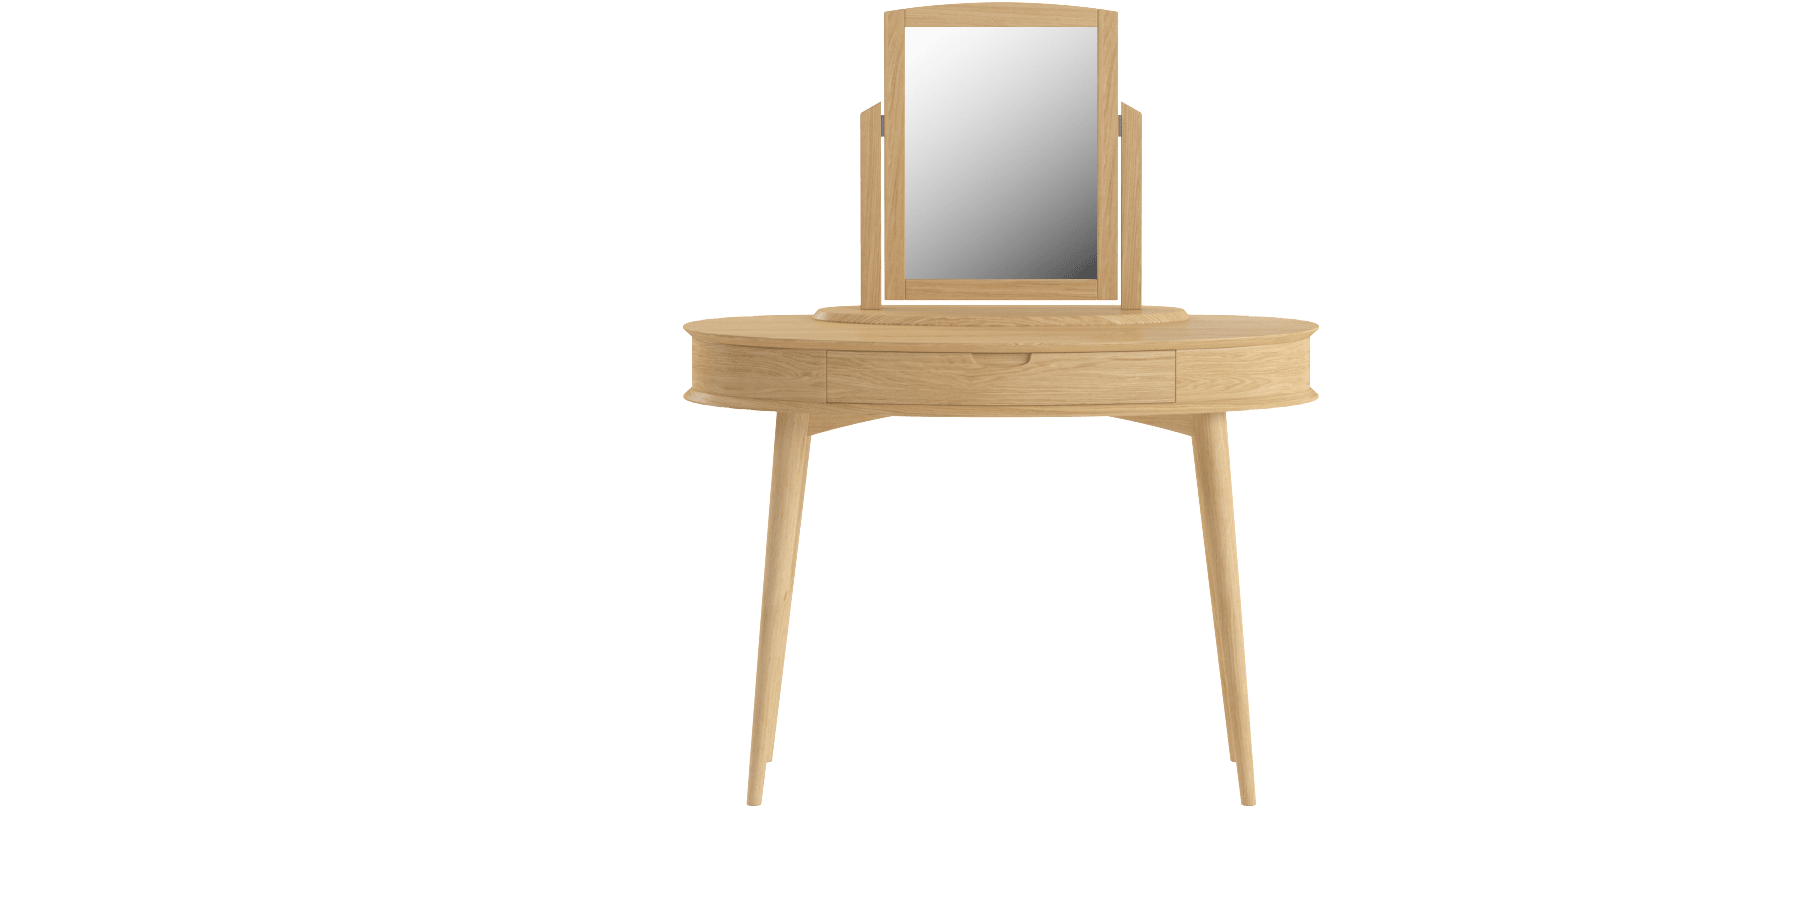 A Mirror On A Table